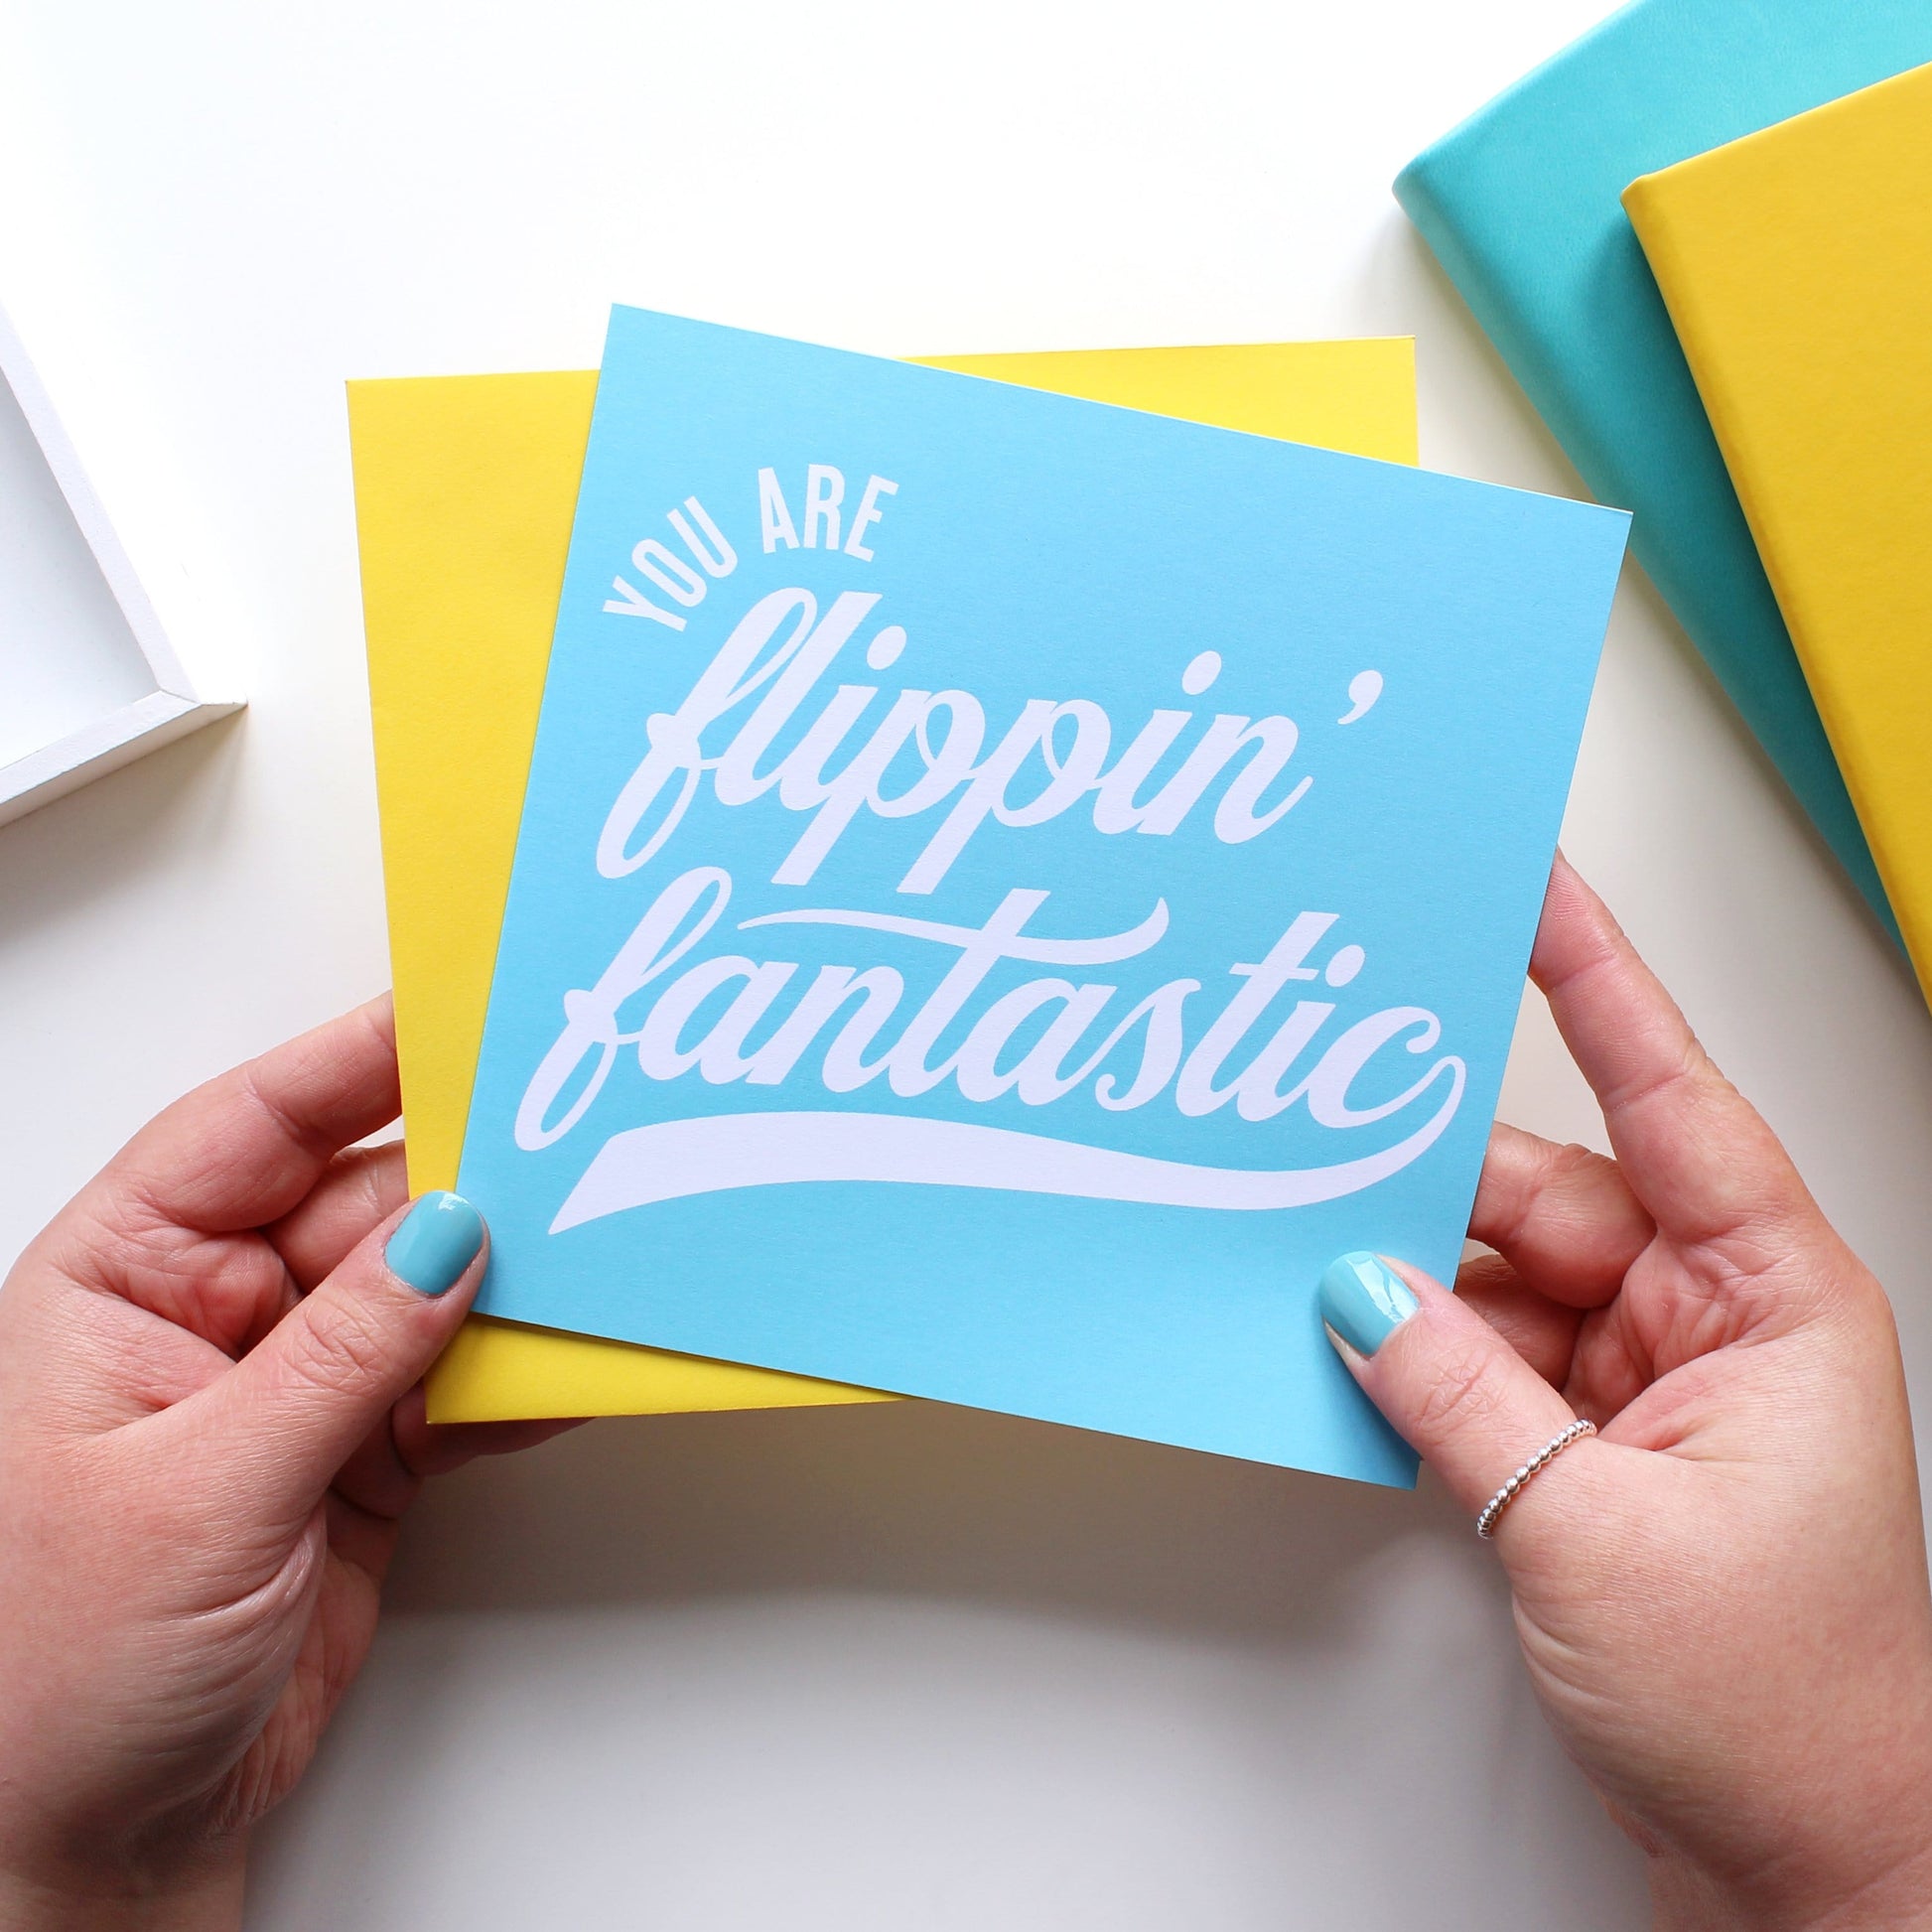 You are flippin' fantastic greeting card from Purple Tree Designs